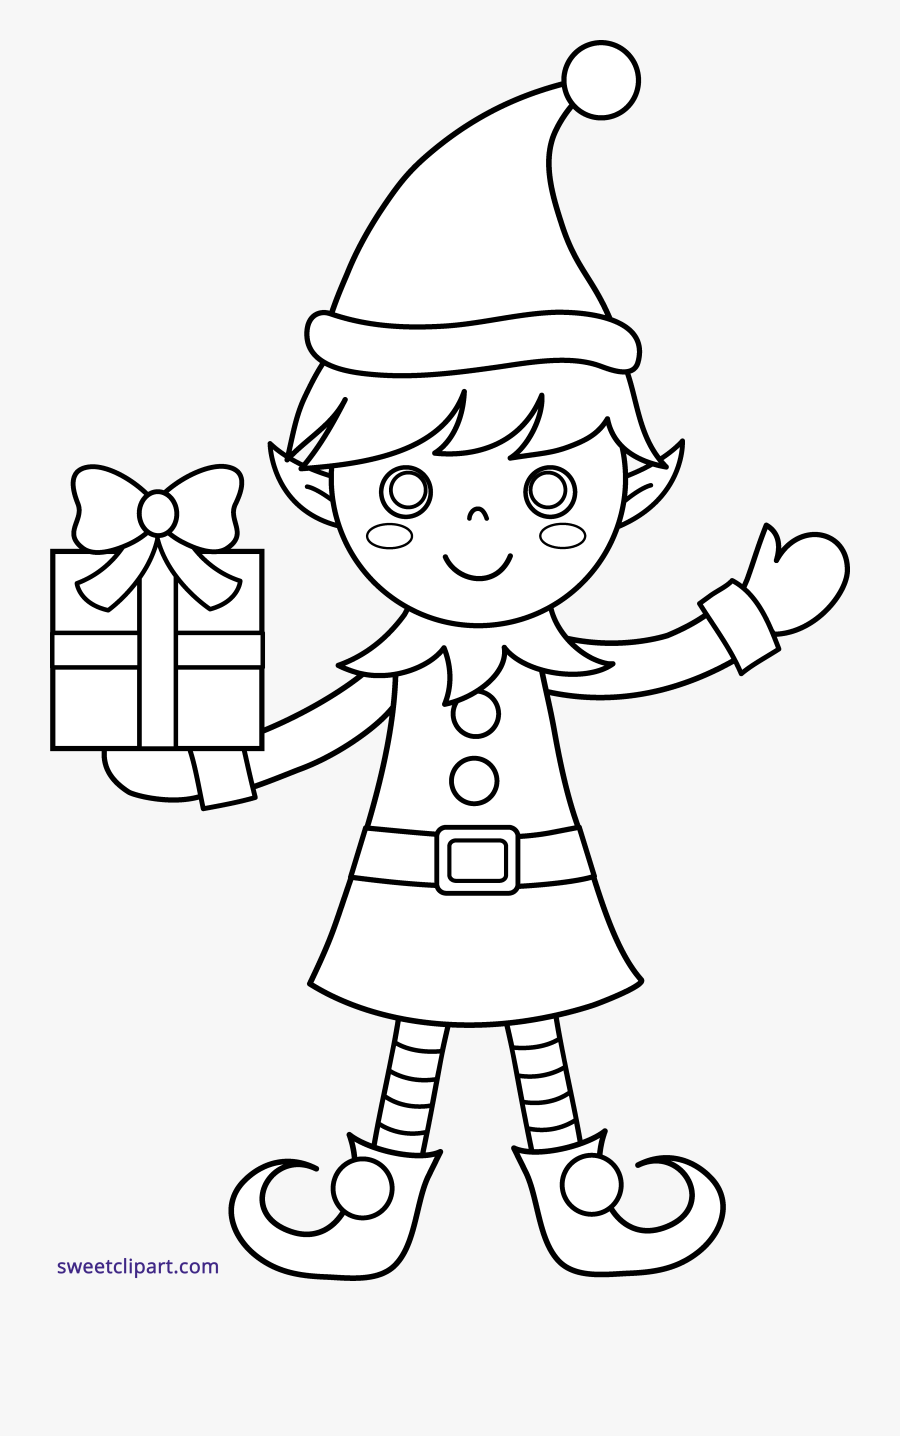 Elf On The Shelf Clipart Black And White / Free Elf On The